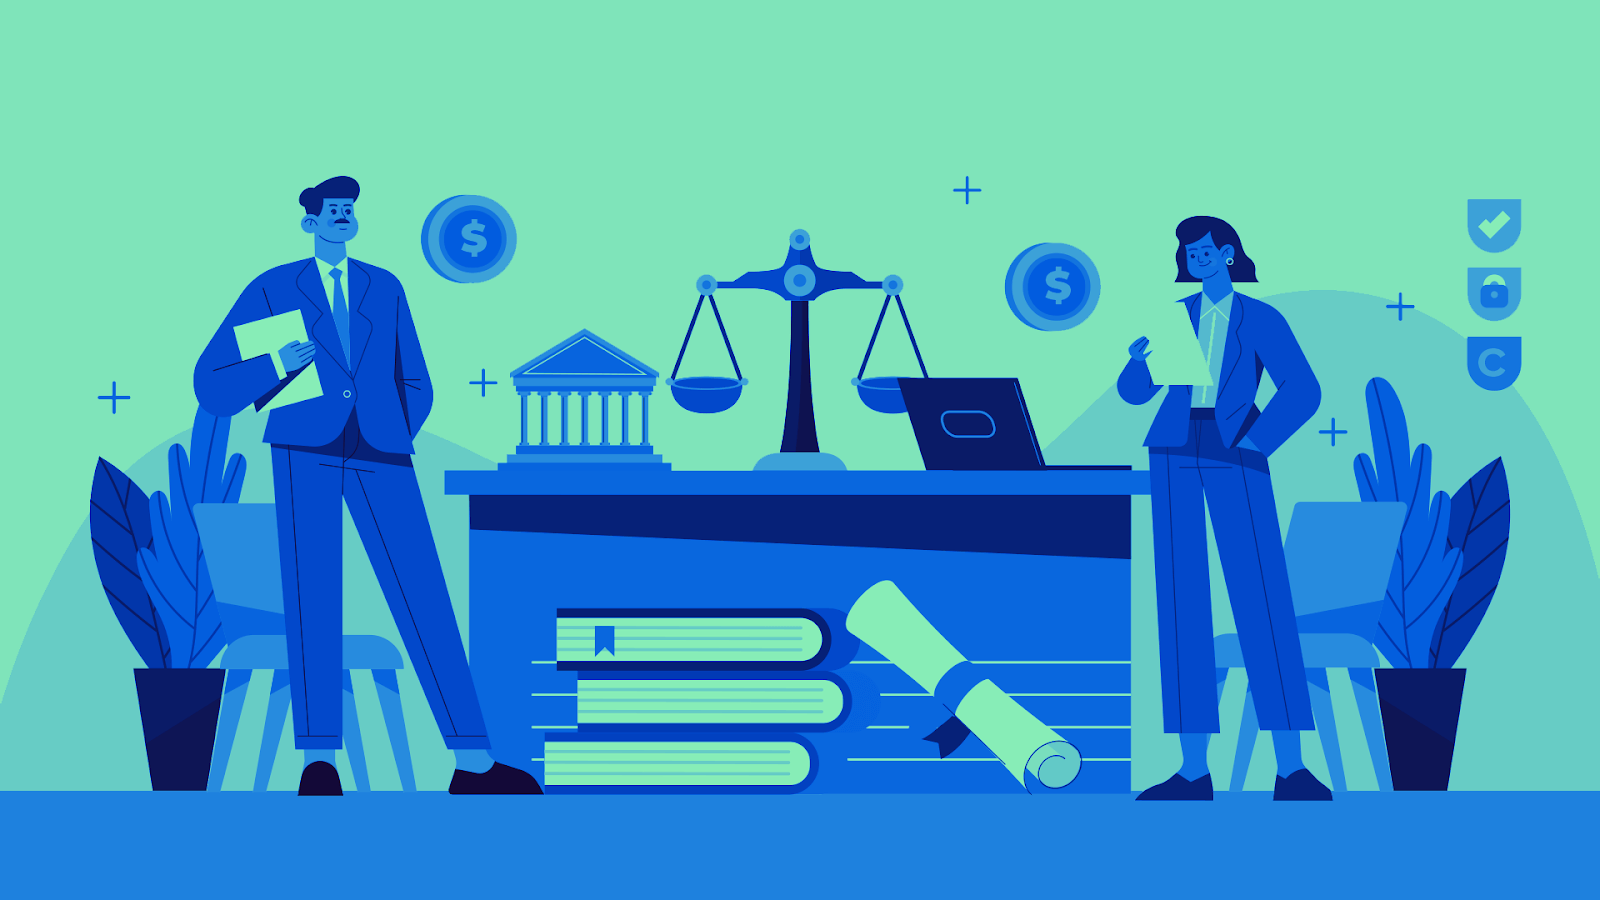 Illustration of two lawyers standing around a desk covered in legal items like a scale, diploma, books, and dollar symbols.